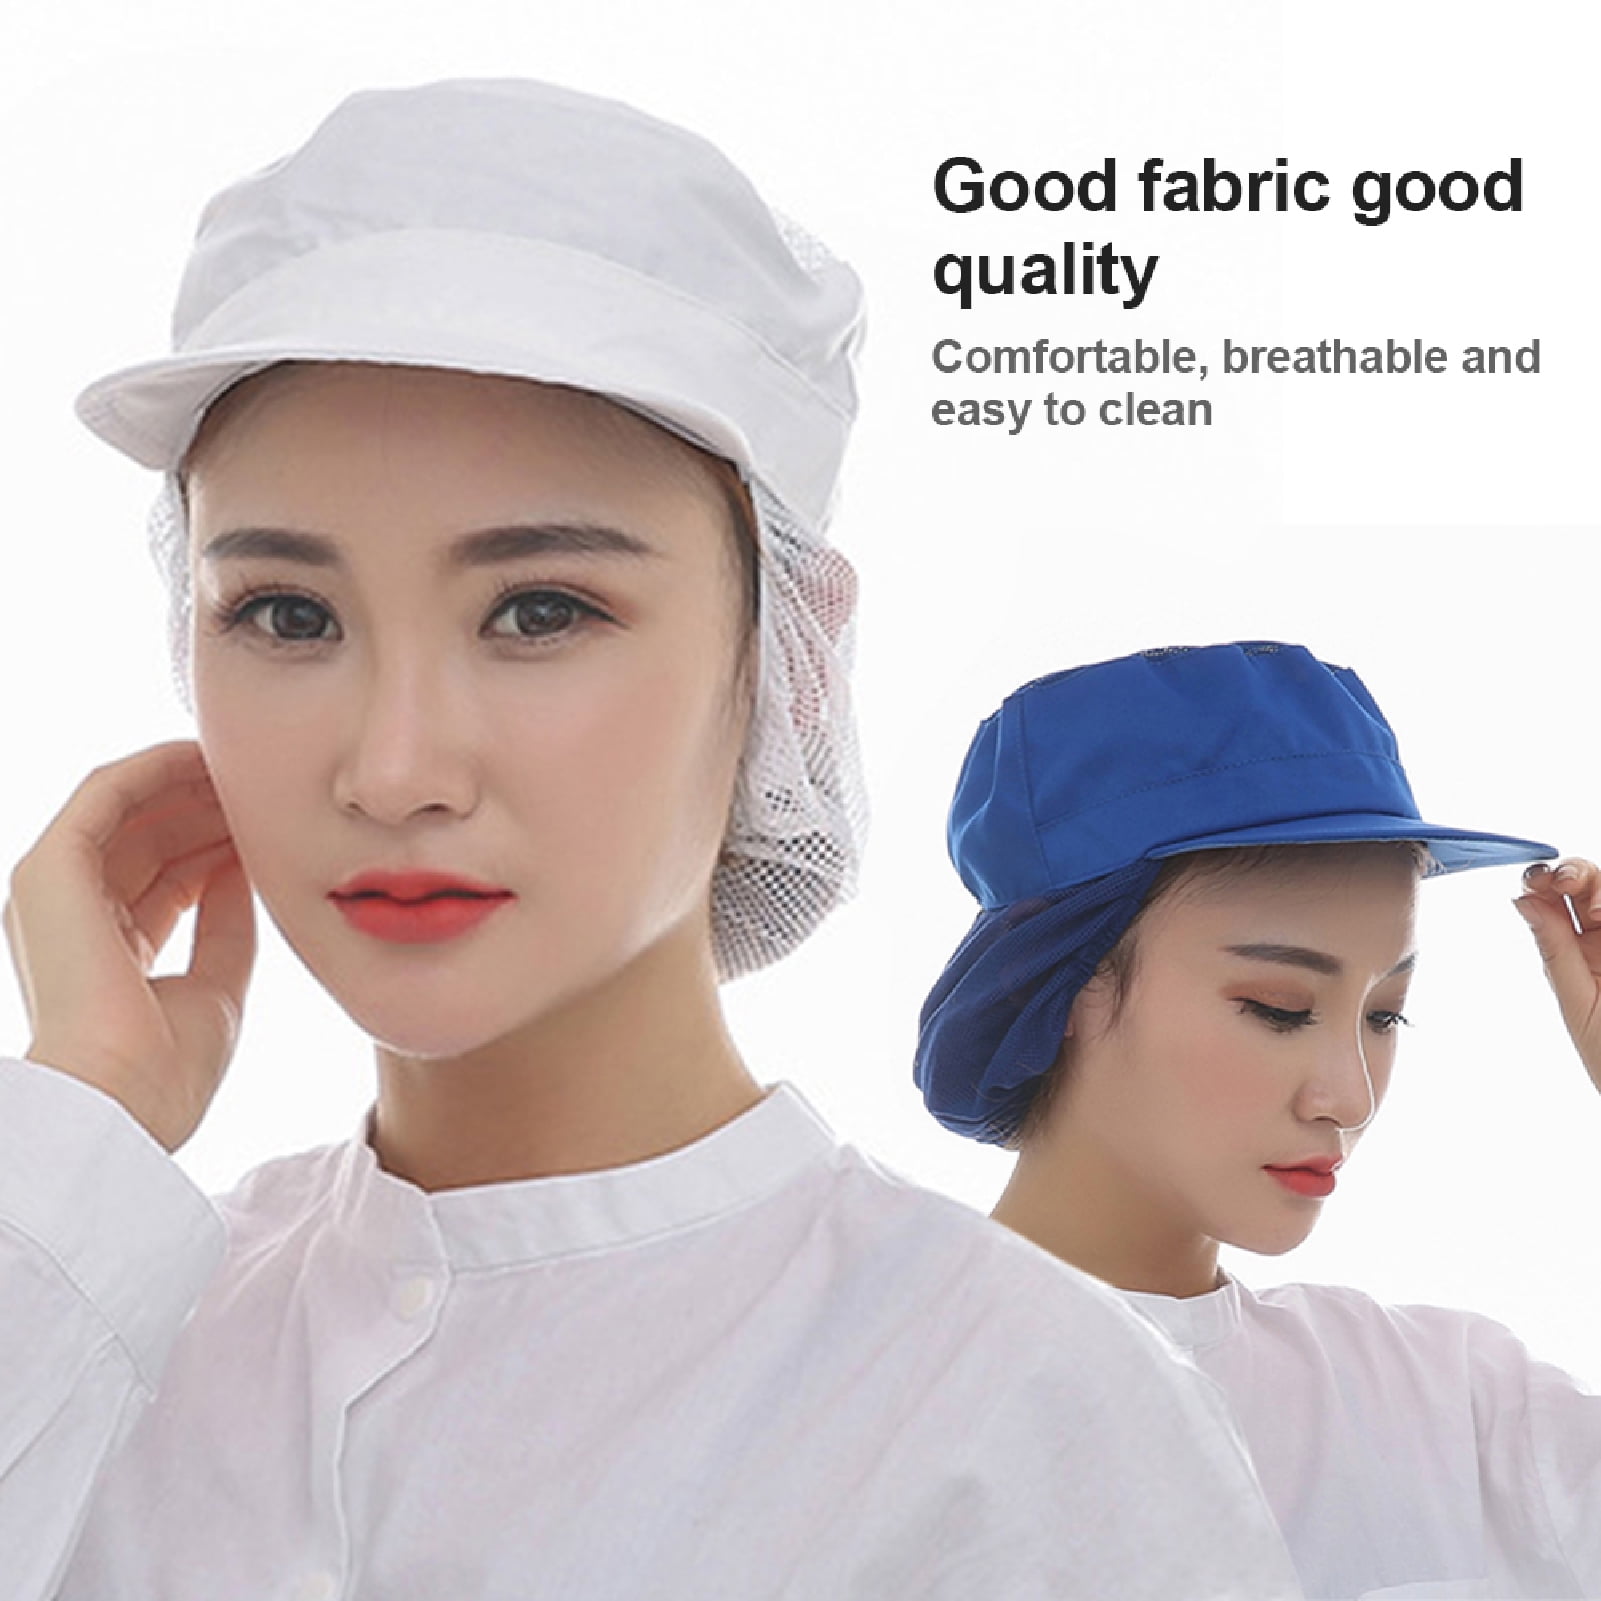 Unisex Scrub Cap Food Hat Chef Cook Breathable Adjustable Catering Kitchen Cap. 